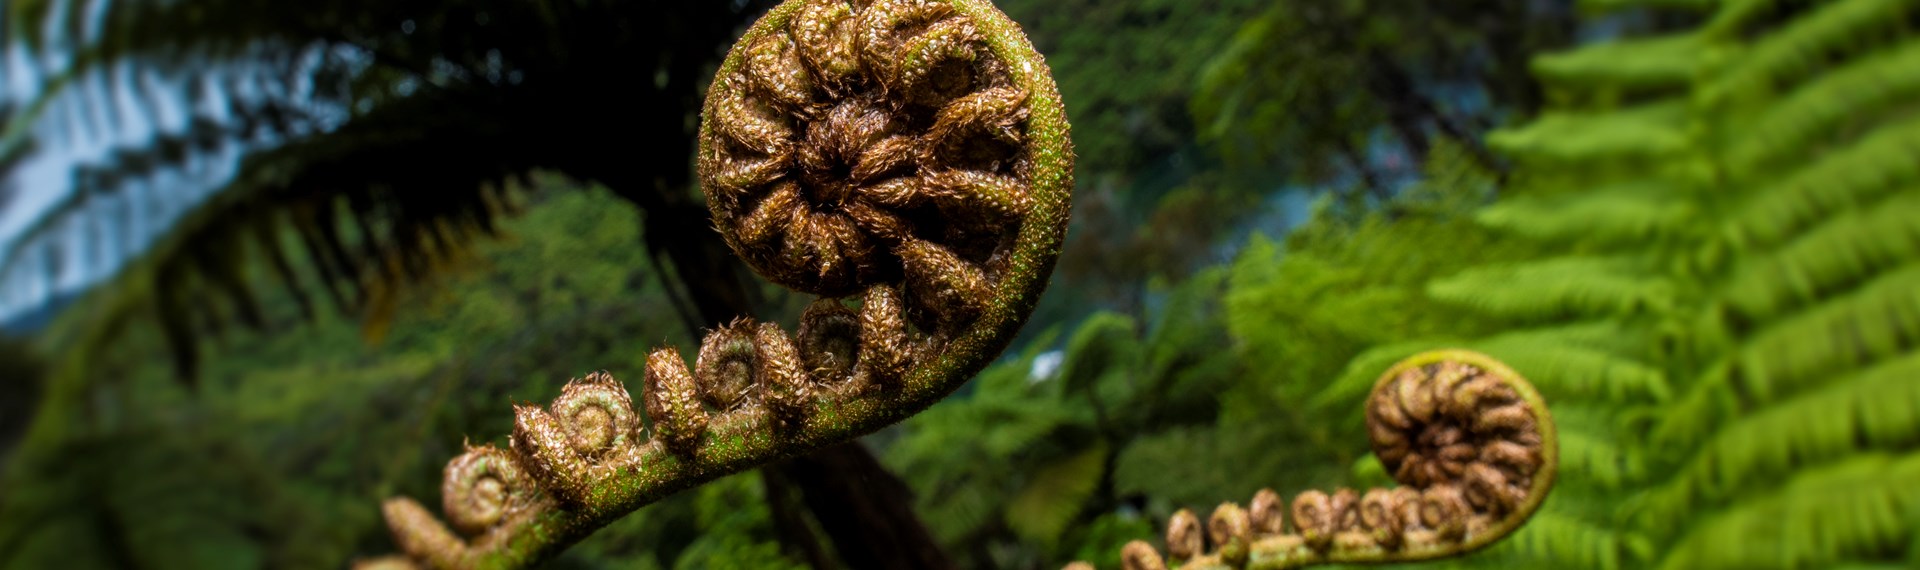 You can find native Punga ferns and their koru in the surrounding forest throughout Punga Cove in the Marlborough Sounds in New Zealand's top of the South Island